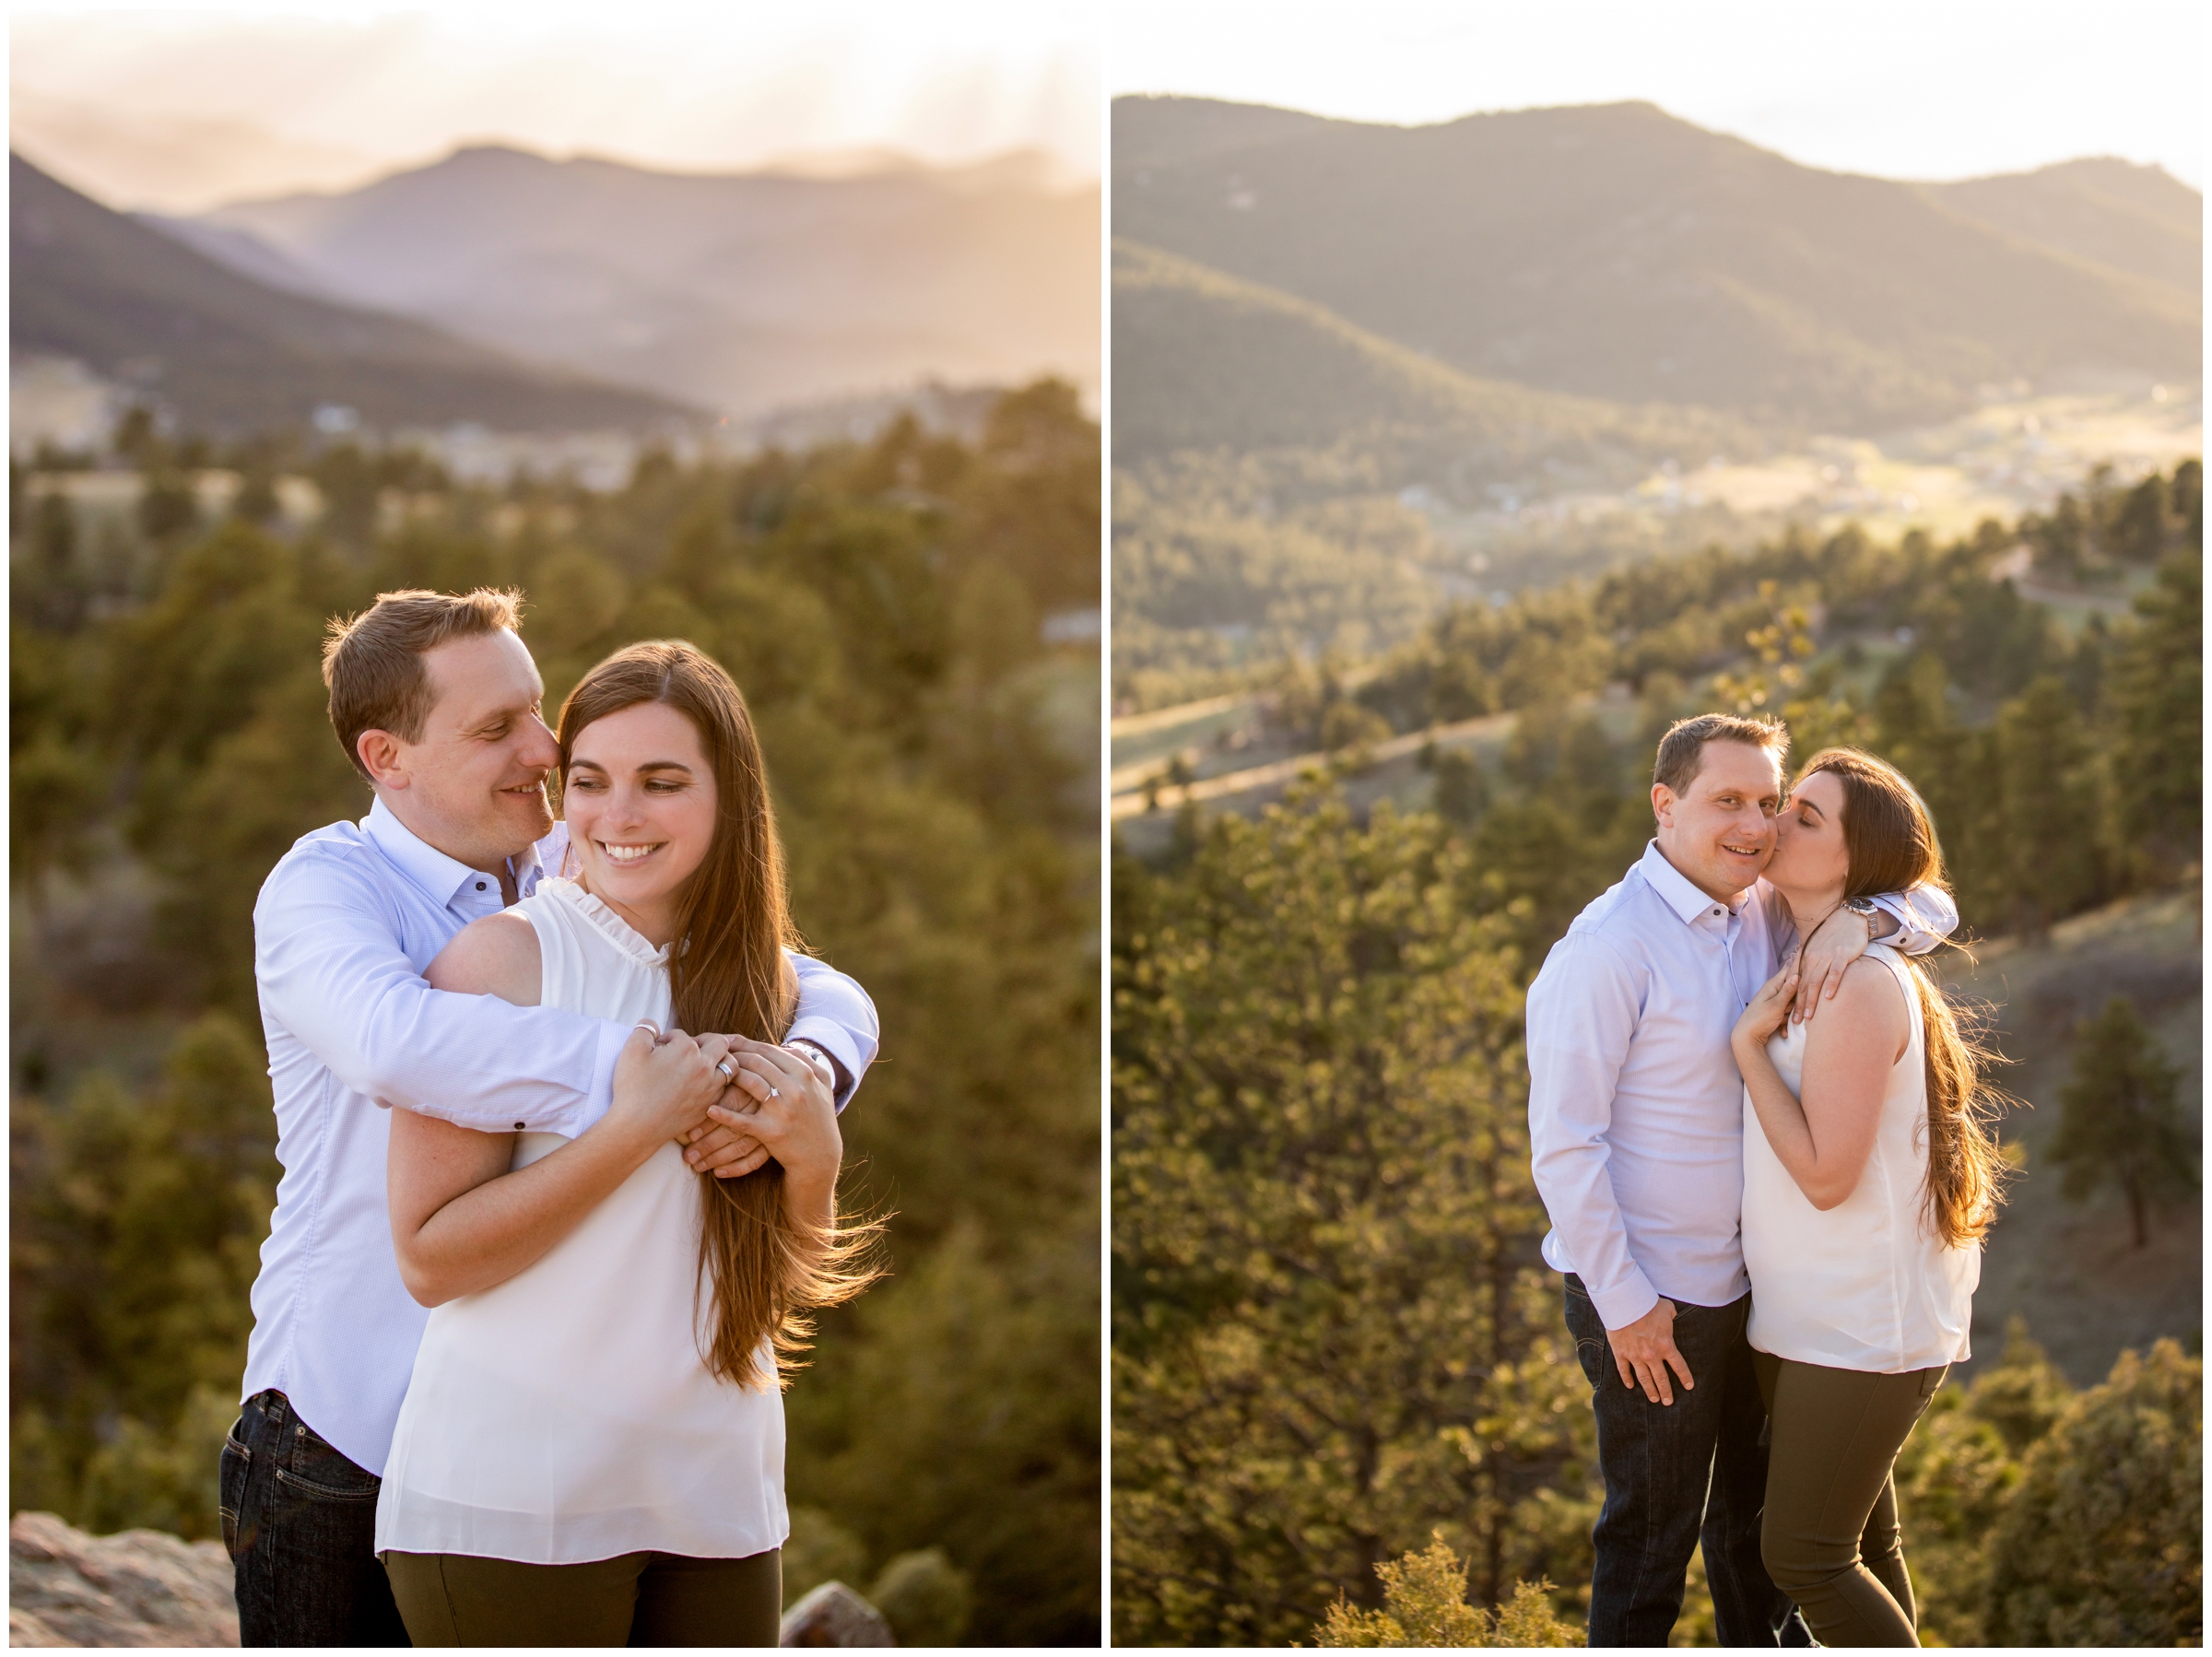 couple embracing with mountains in background during sunset engagement photos in Colorado during springtime